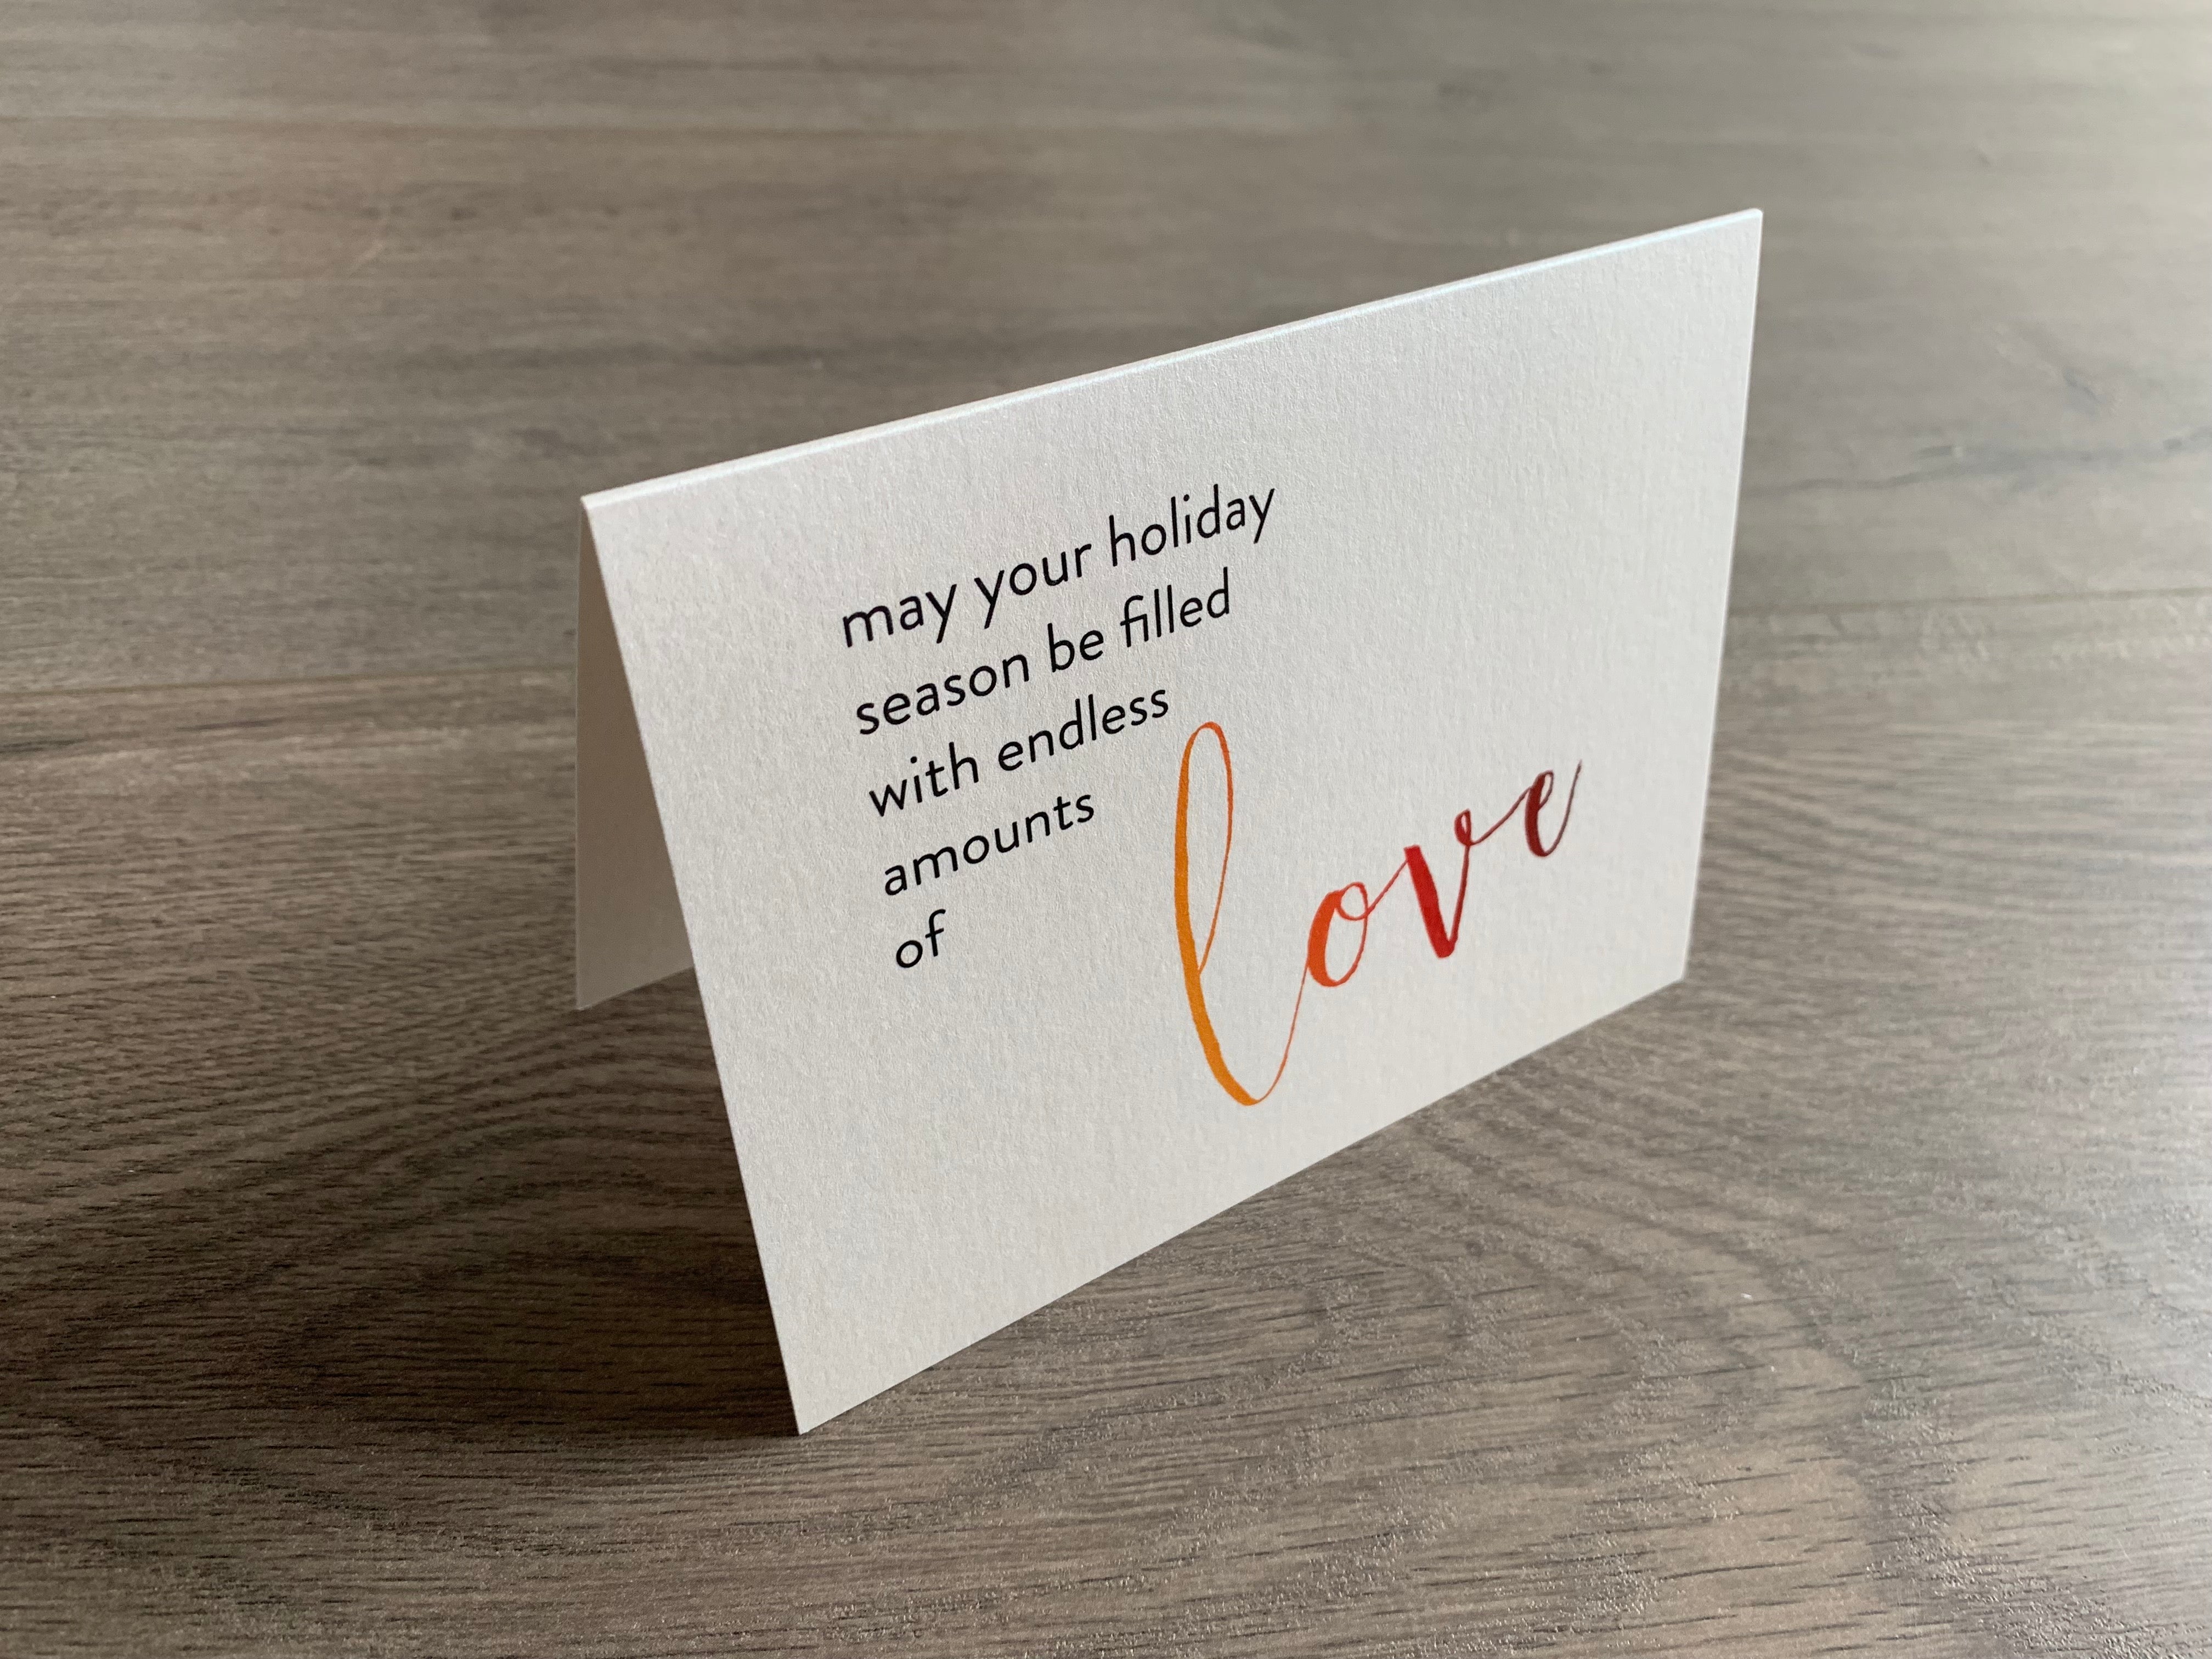 A shimmery cream notecard is propped up on a wooden floor. The card says, "may your holiday season be filled with endless amounts of love." The word "love" is in a script font that fades from orange to red. Meaning of Christmas collection by Stationare.